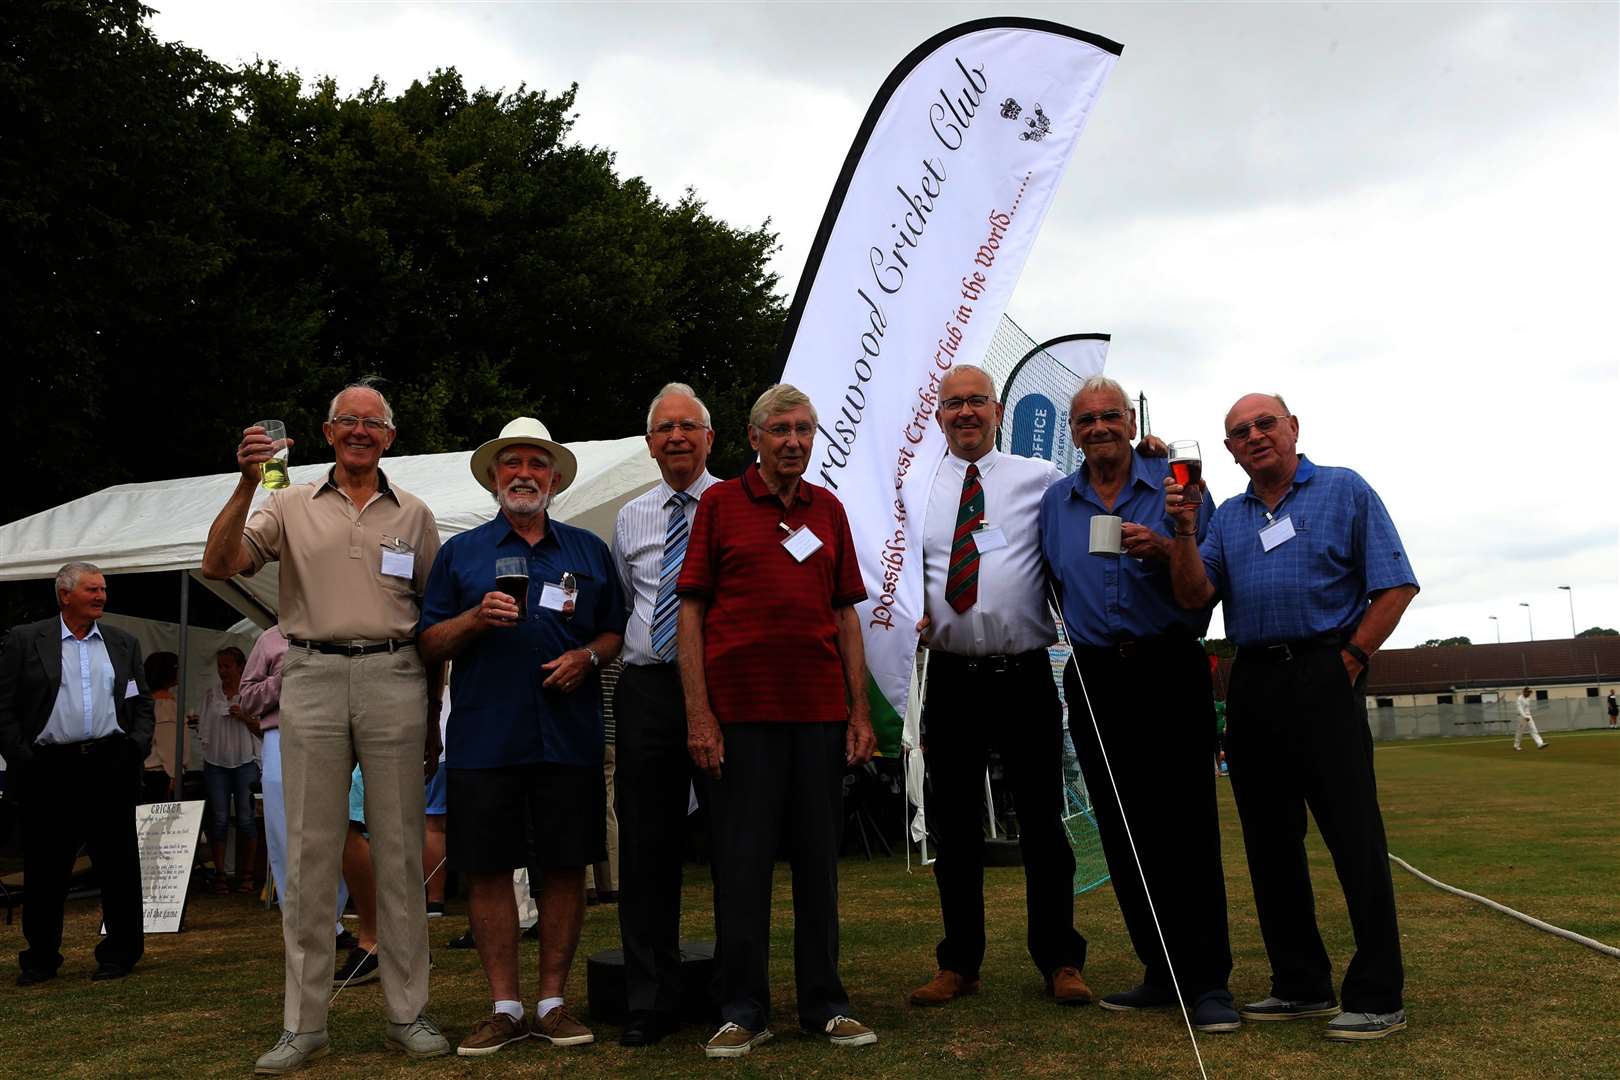 Peter Edmonds (in red) with Lordswood chairman Richard Cross and lifelong friend Colin Gardener, back in 2016 with other founder members at Lordswood Cricket Club during the club's 50th Anniversary